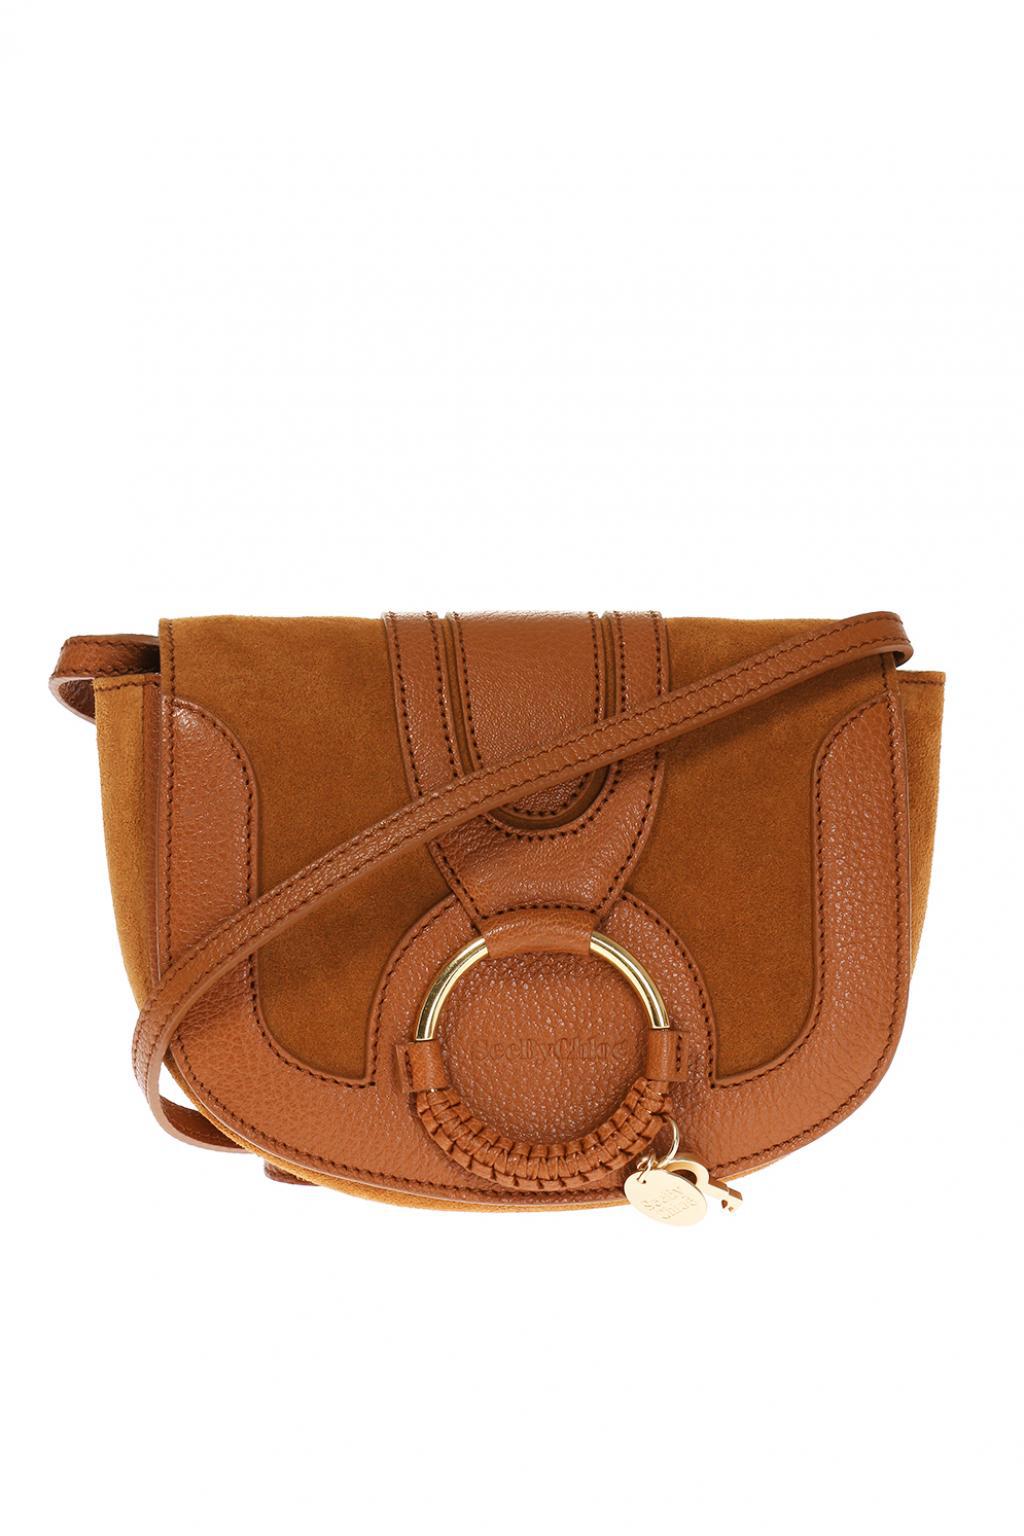 Lyst - See By Chloé Hana Mini Textured-leather And Suede Shoulder Bag ...